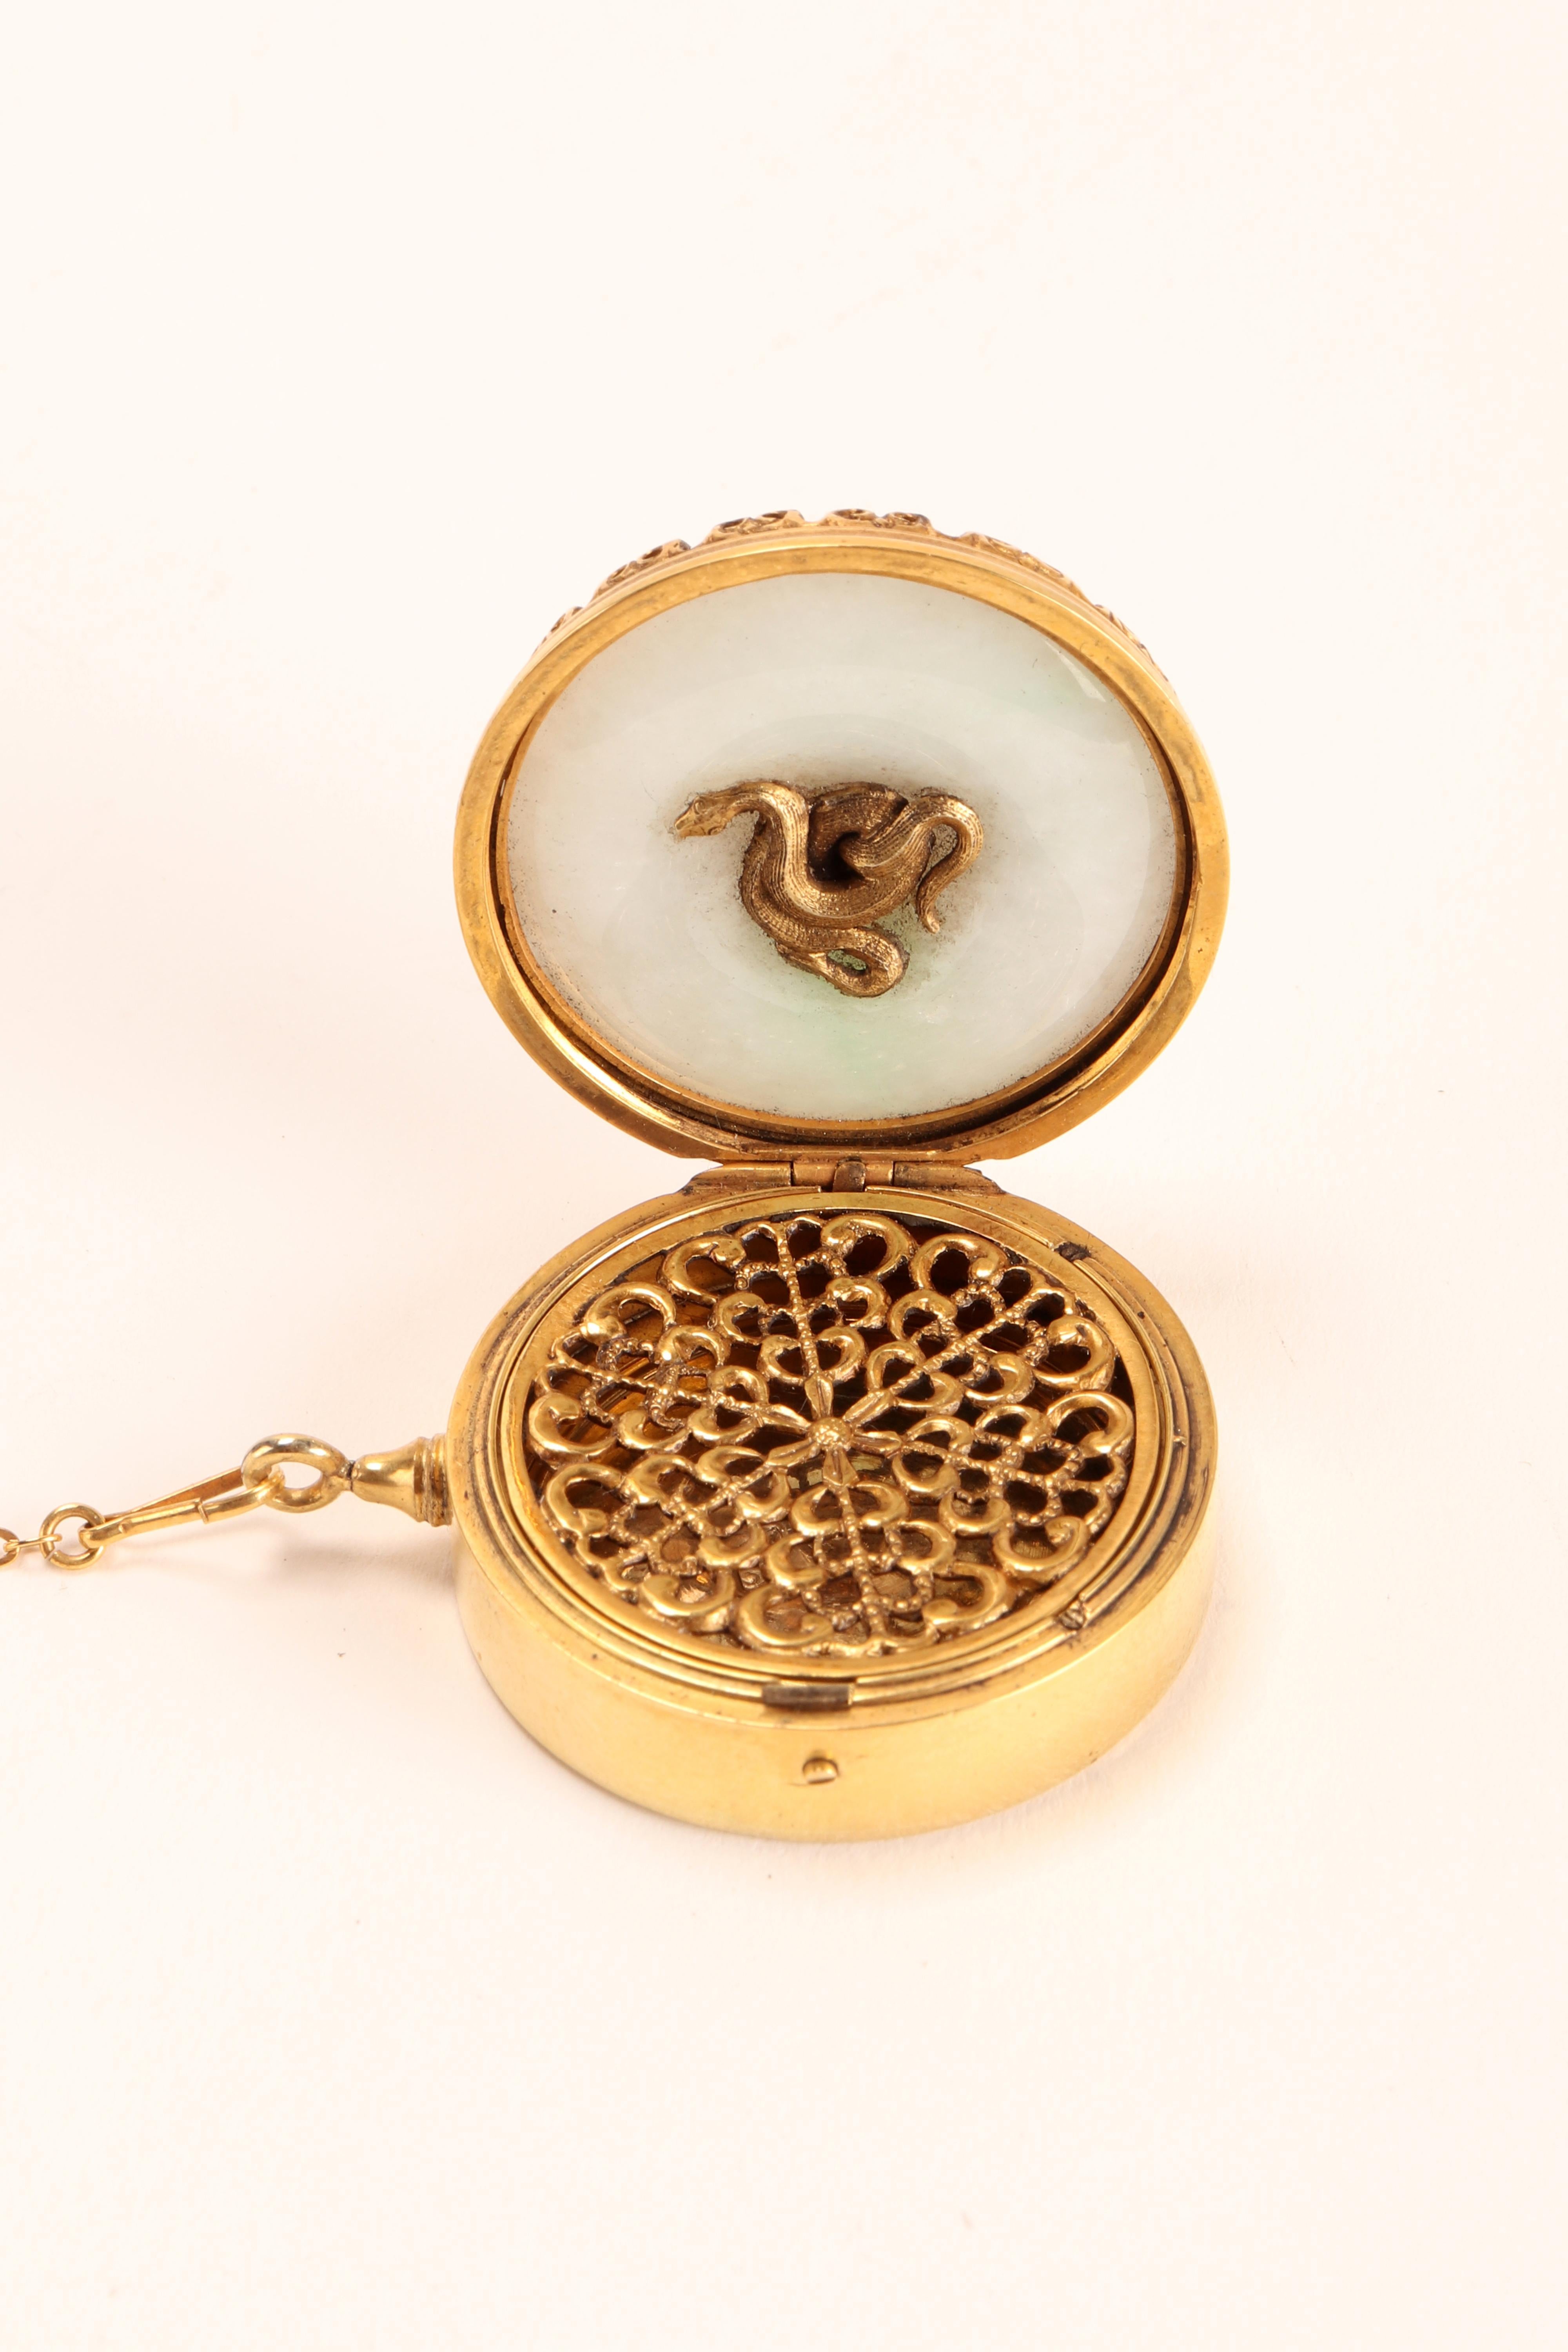 French Art Nouveau Gold and Jade Vinaigrette with Snakes, France 1900 For Sale